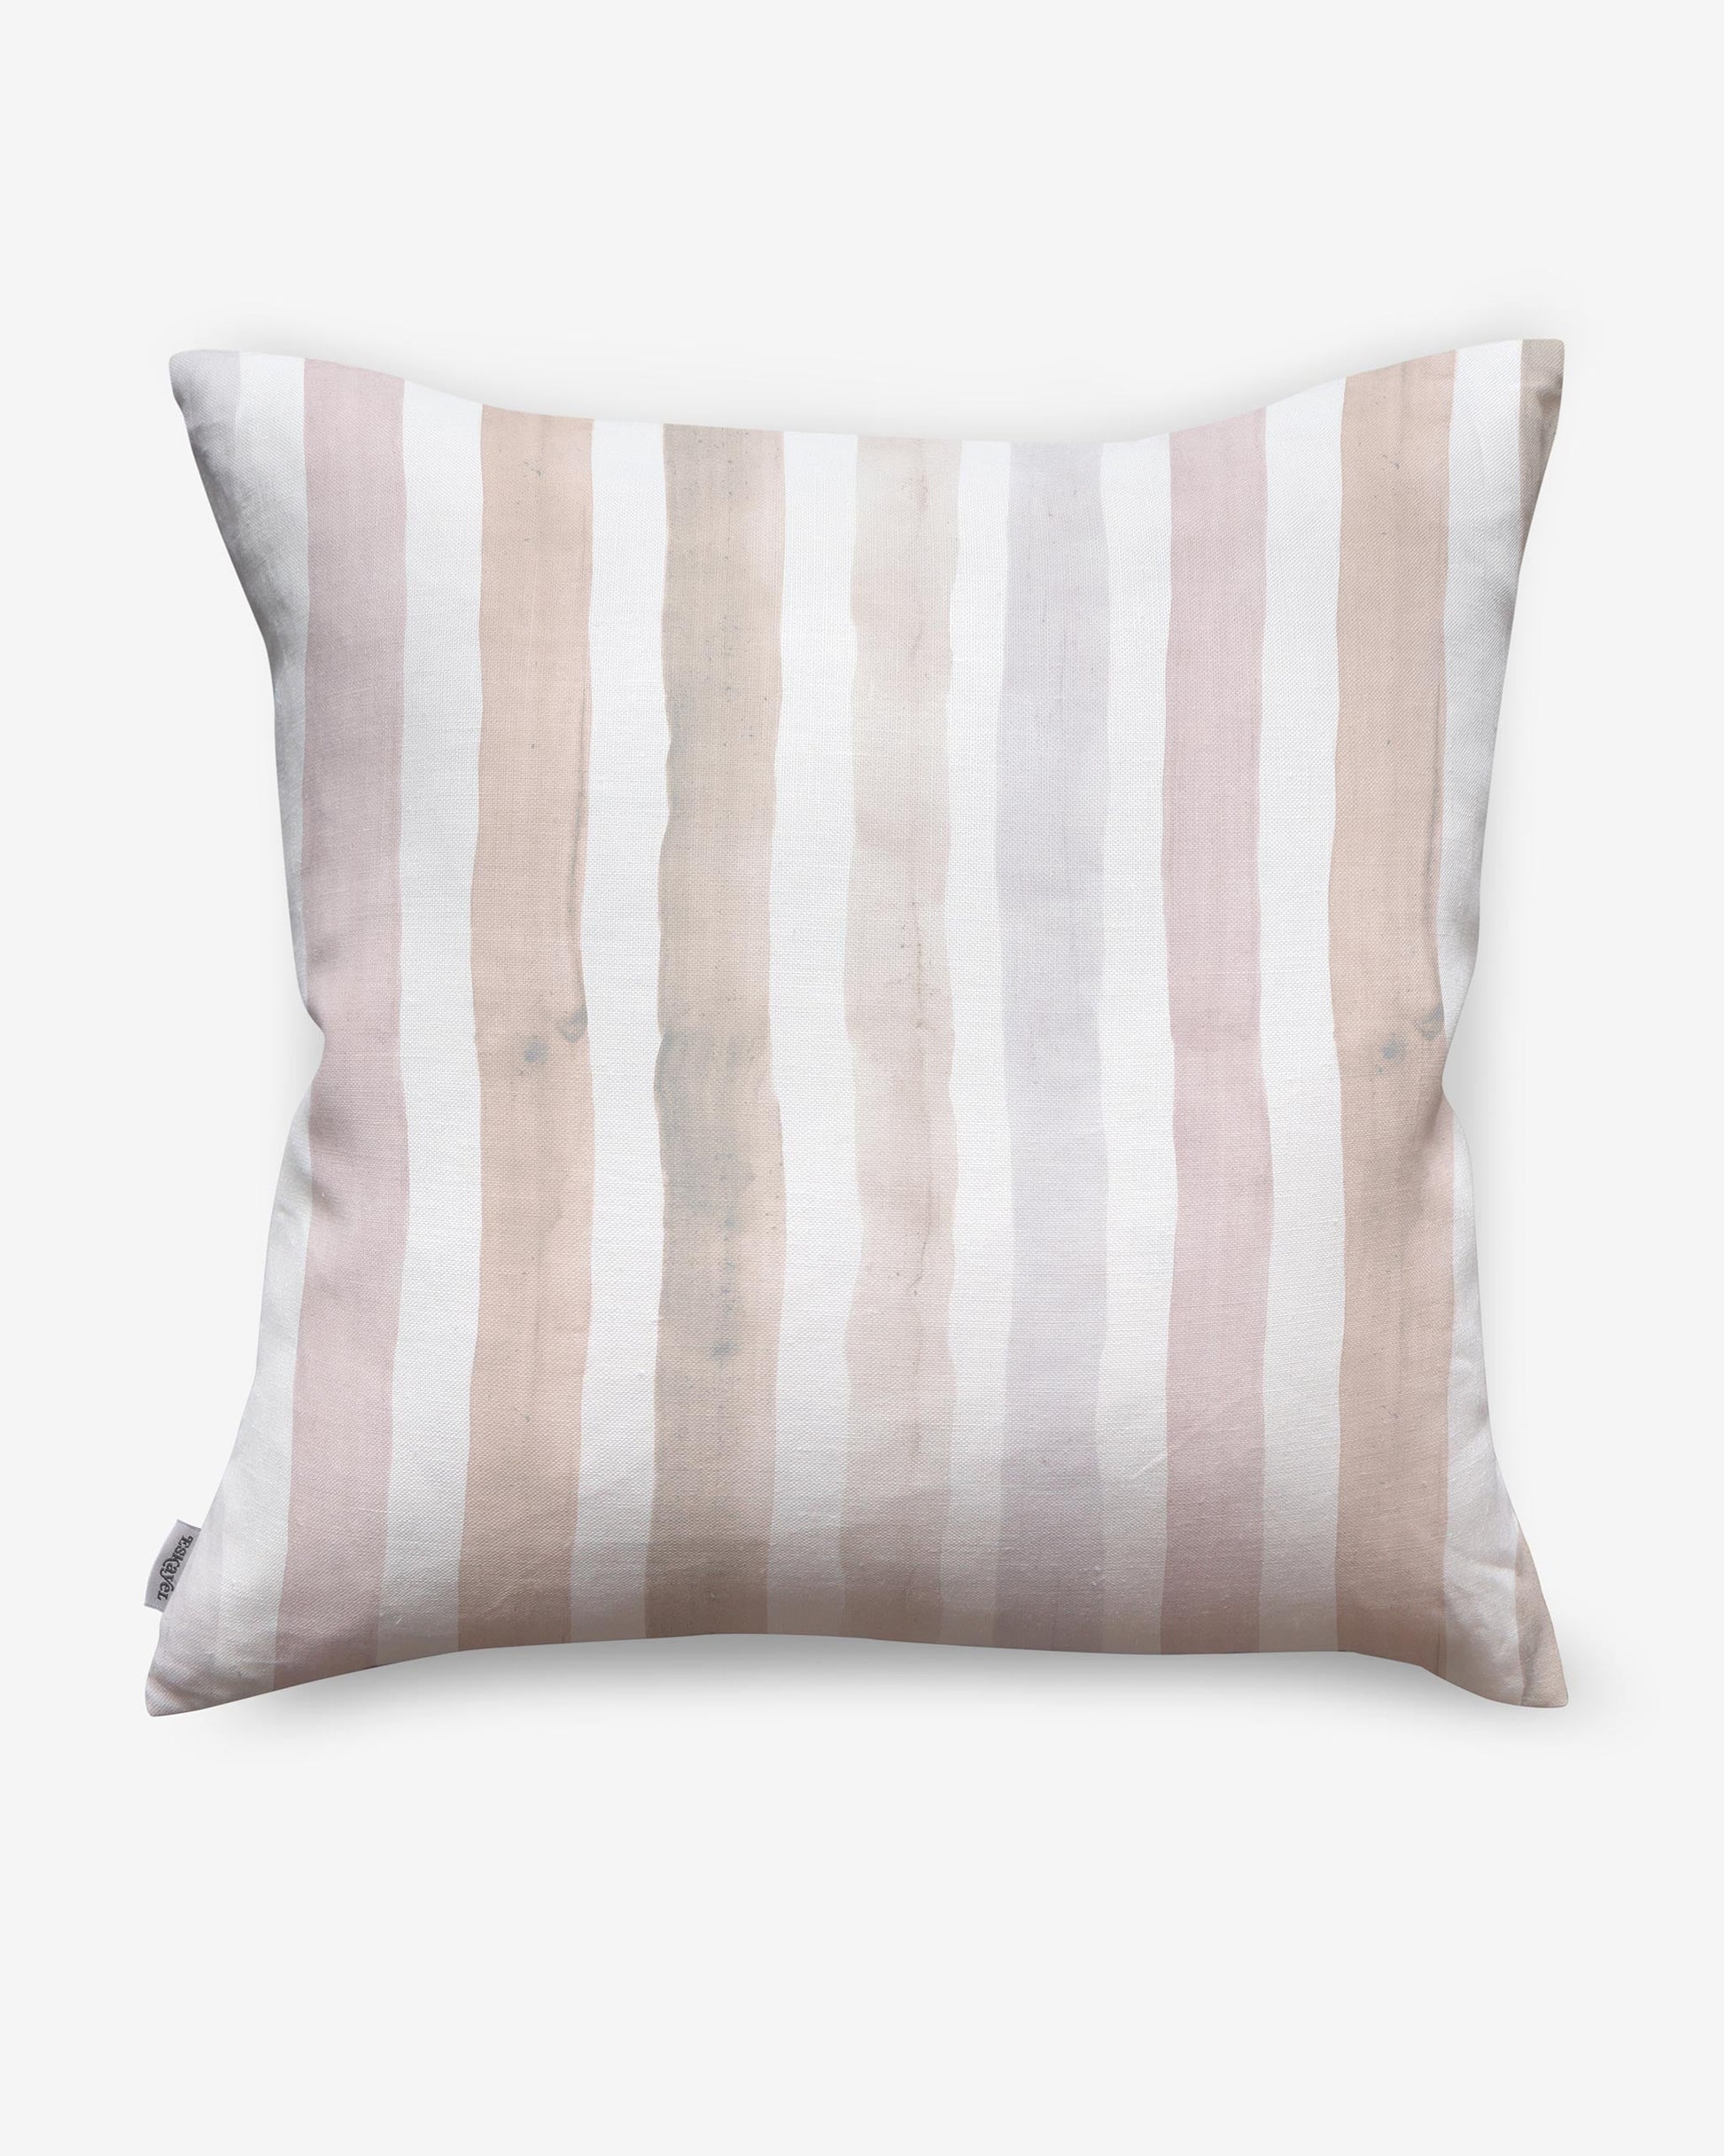 A Gradient Stripe Outdoor Pillow Pink Island with a pink and beige Gradient Stripe pattern